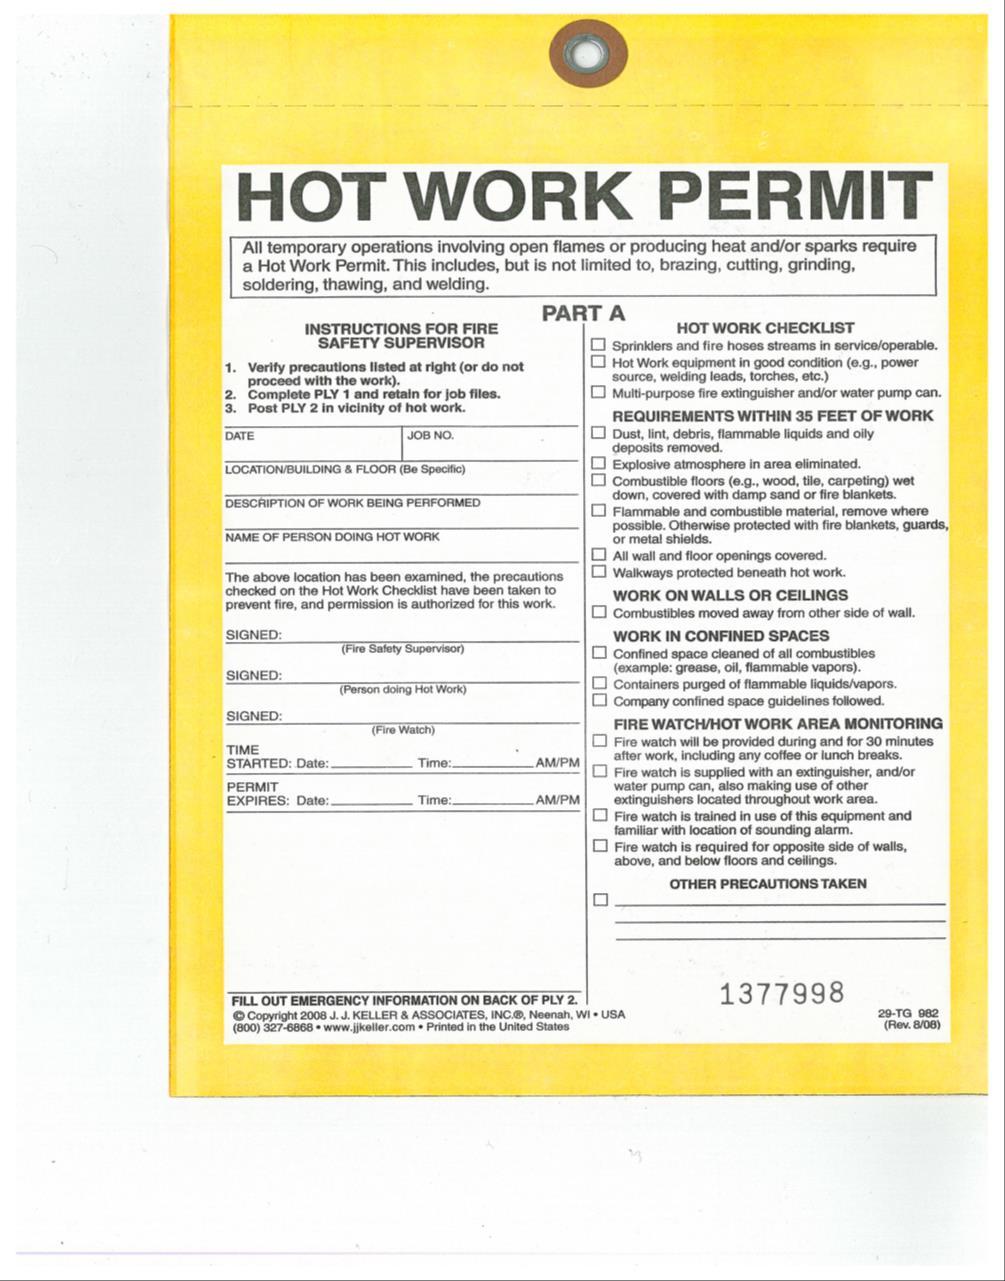 *NOTICE* DO NOT PRINT/USE THIS COPY AS YOUR OFFICIAL HOT